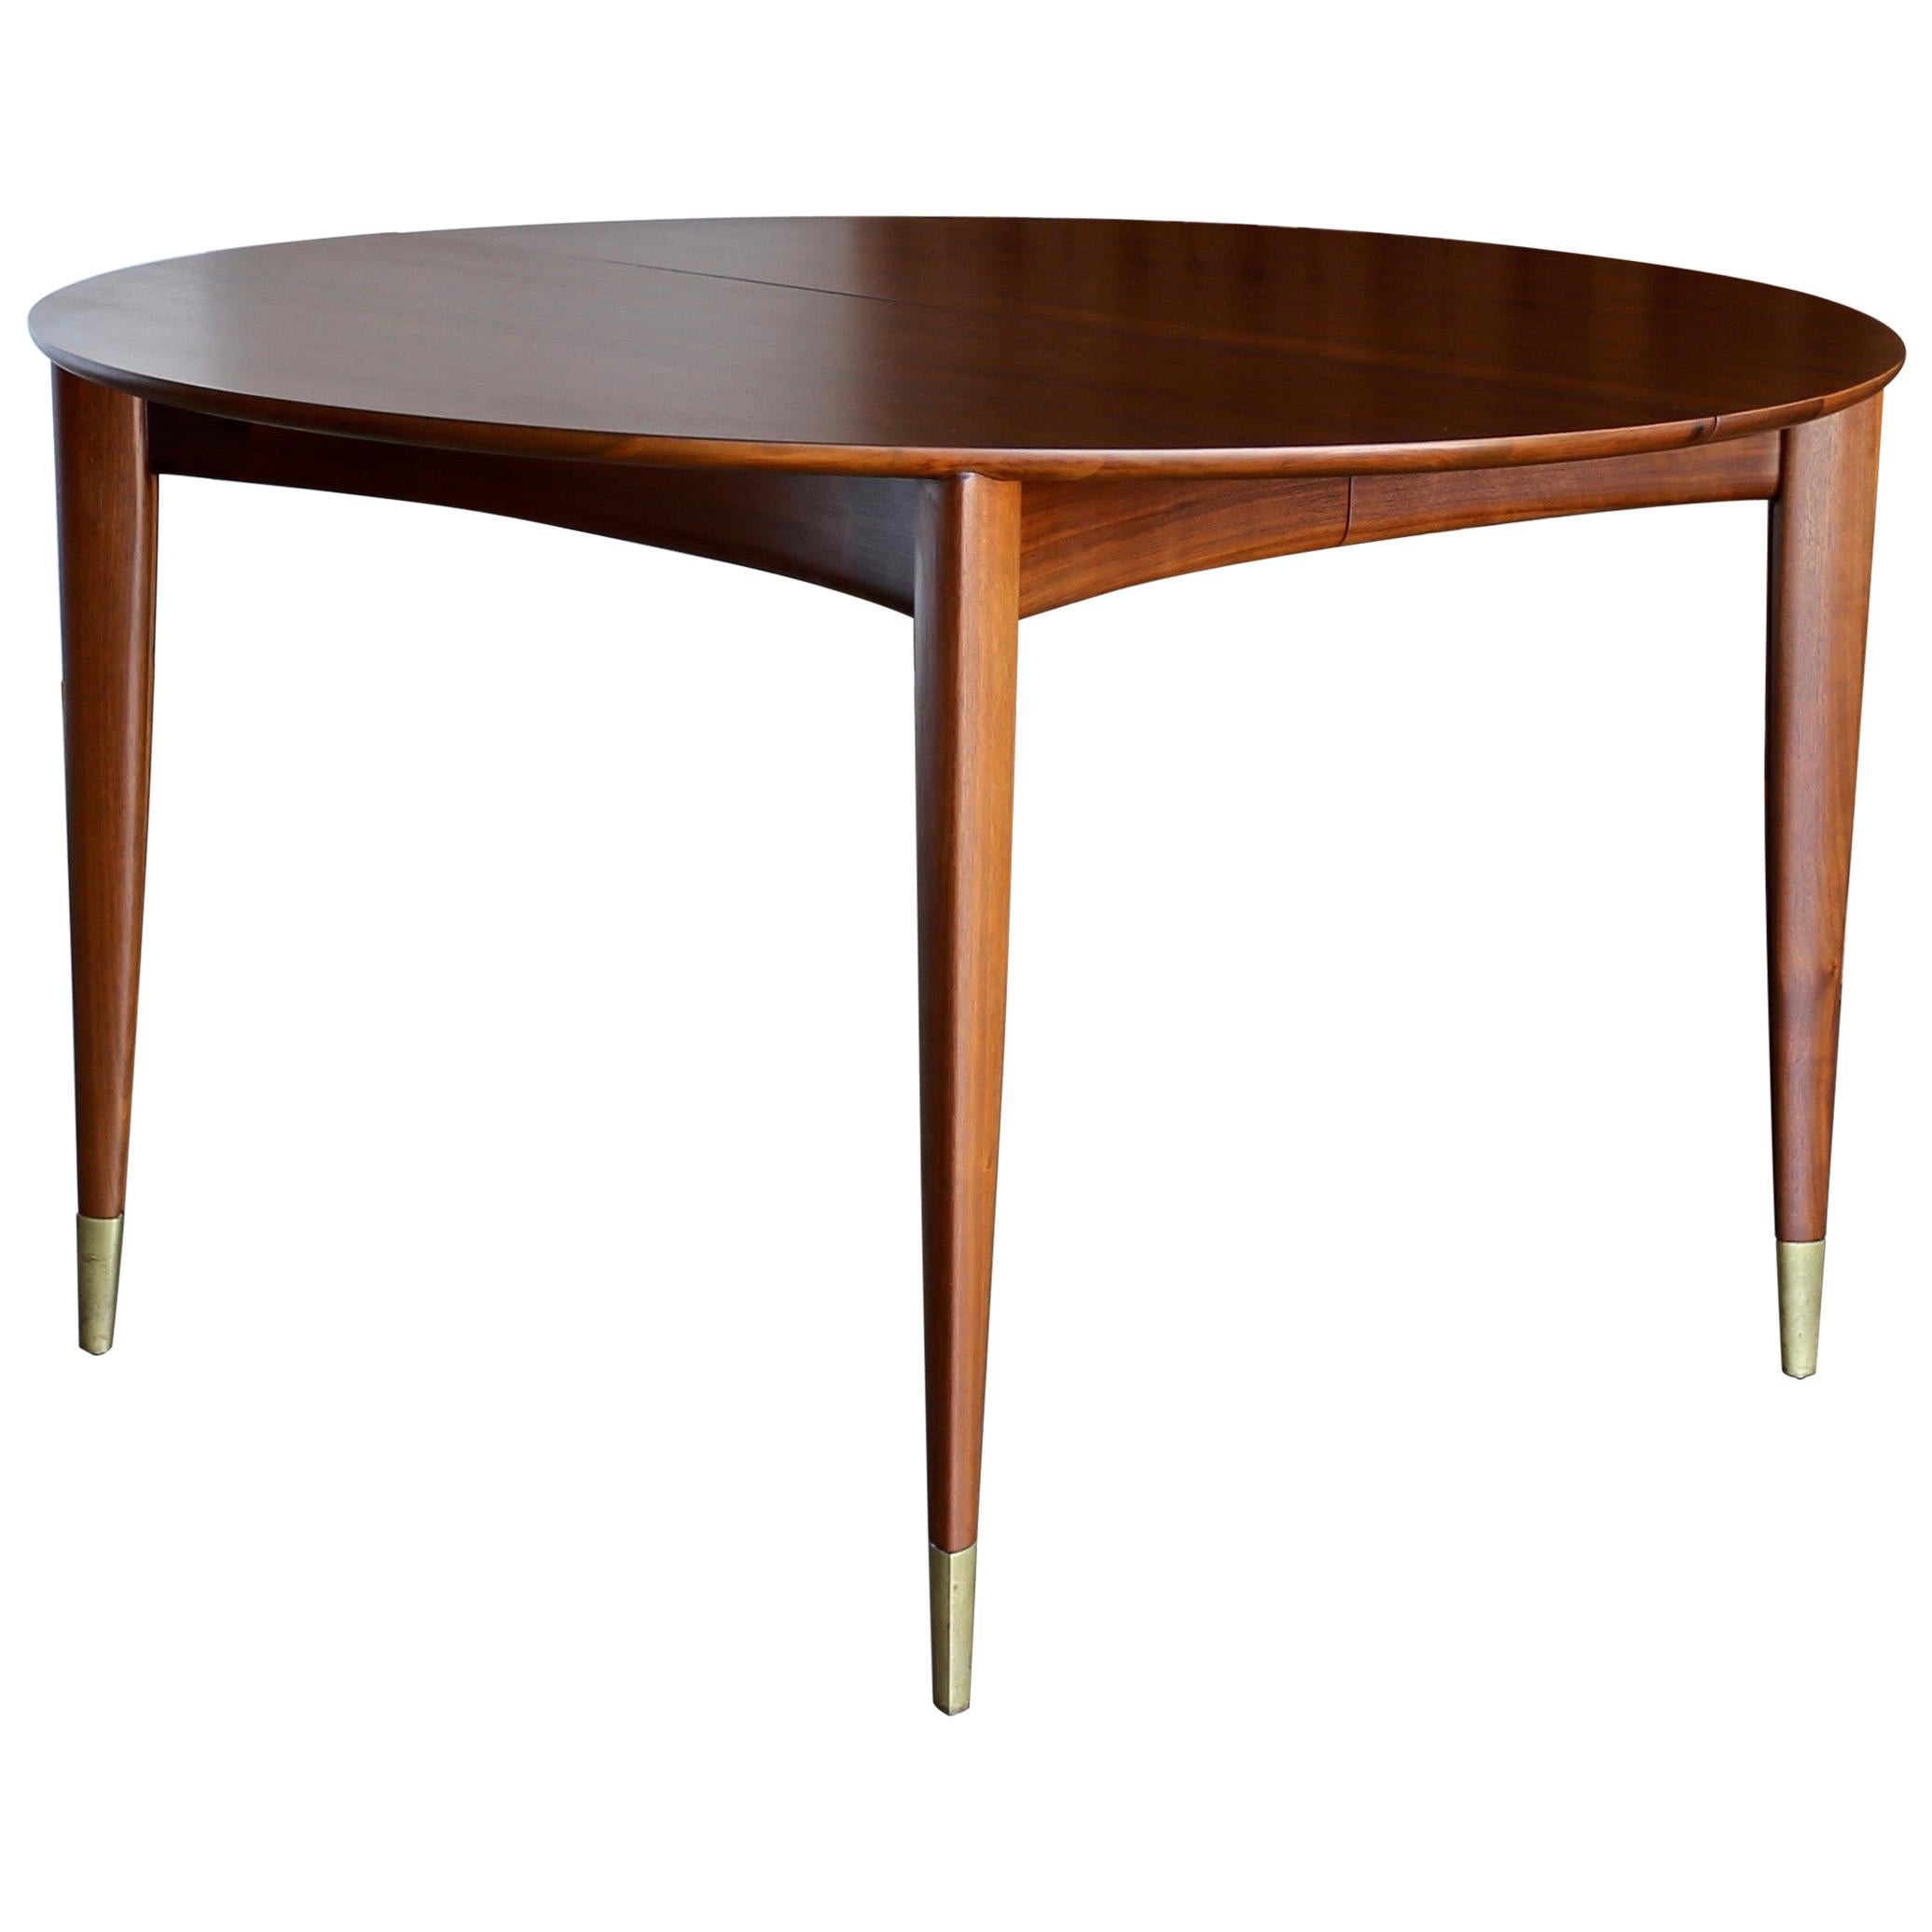 Gio Ponti Dining Table for M. Singer & Sons, circa 1955